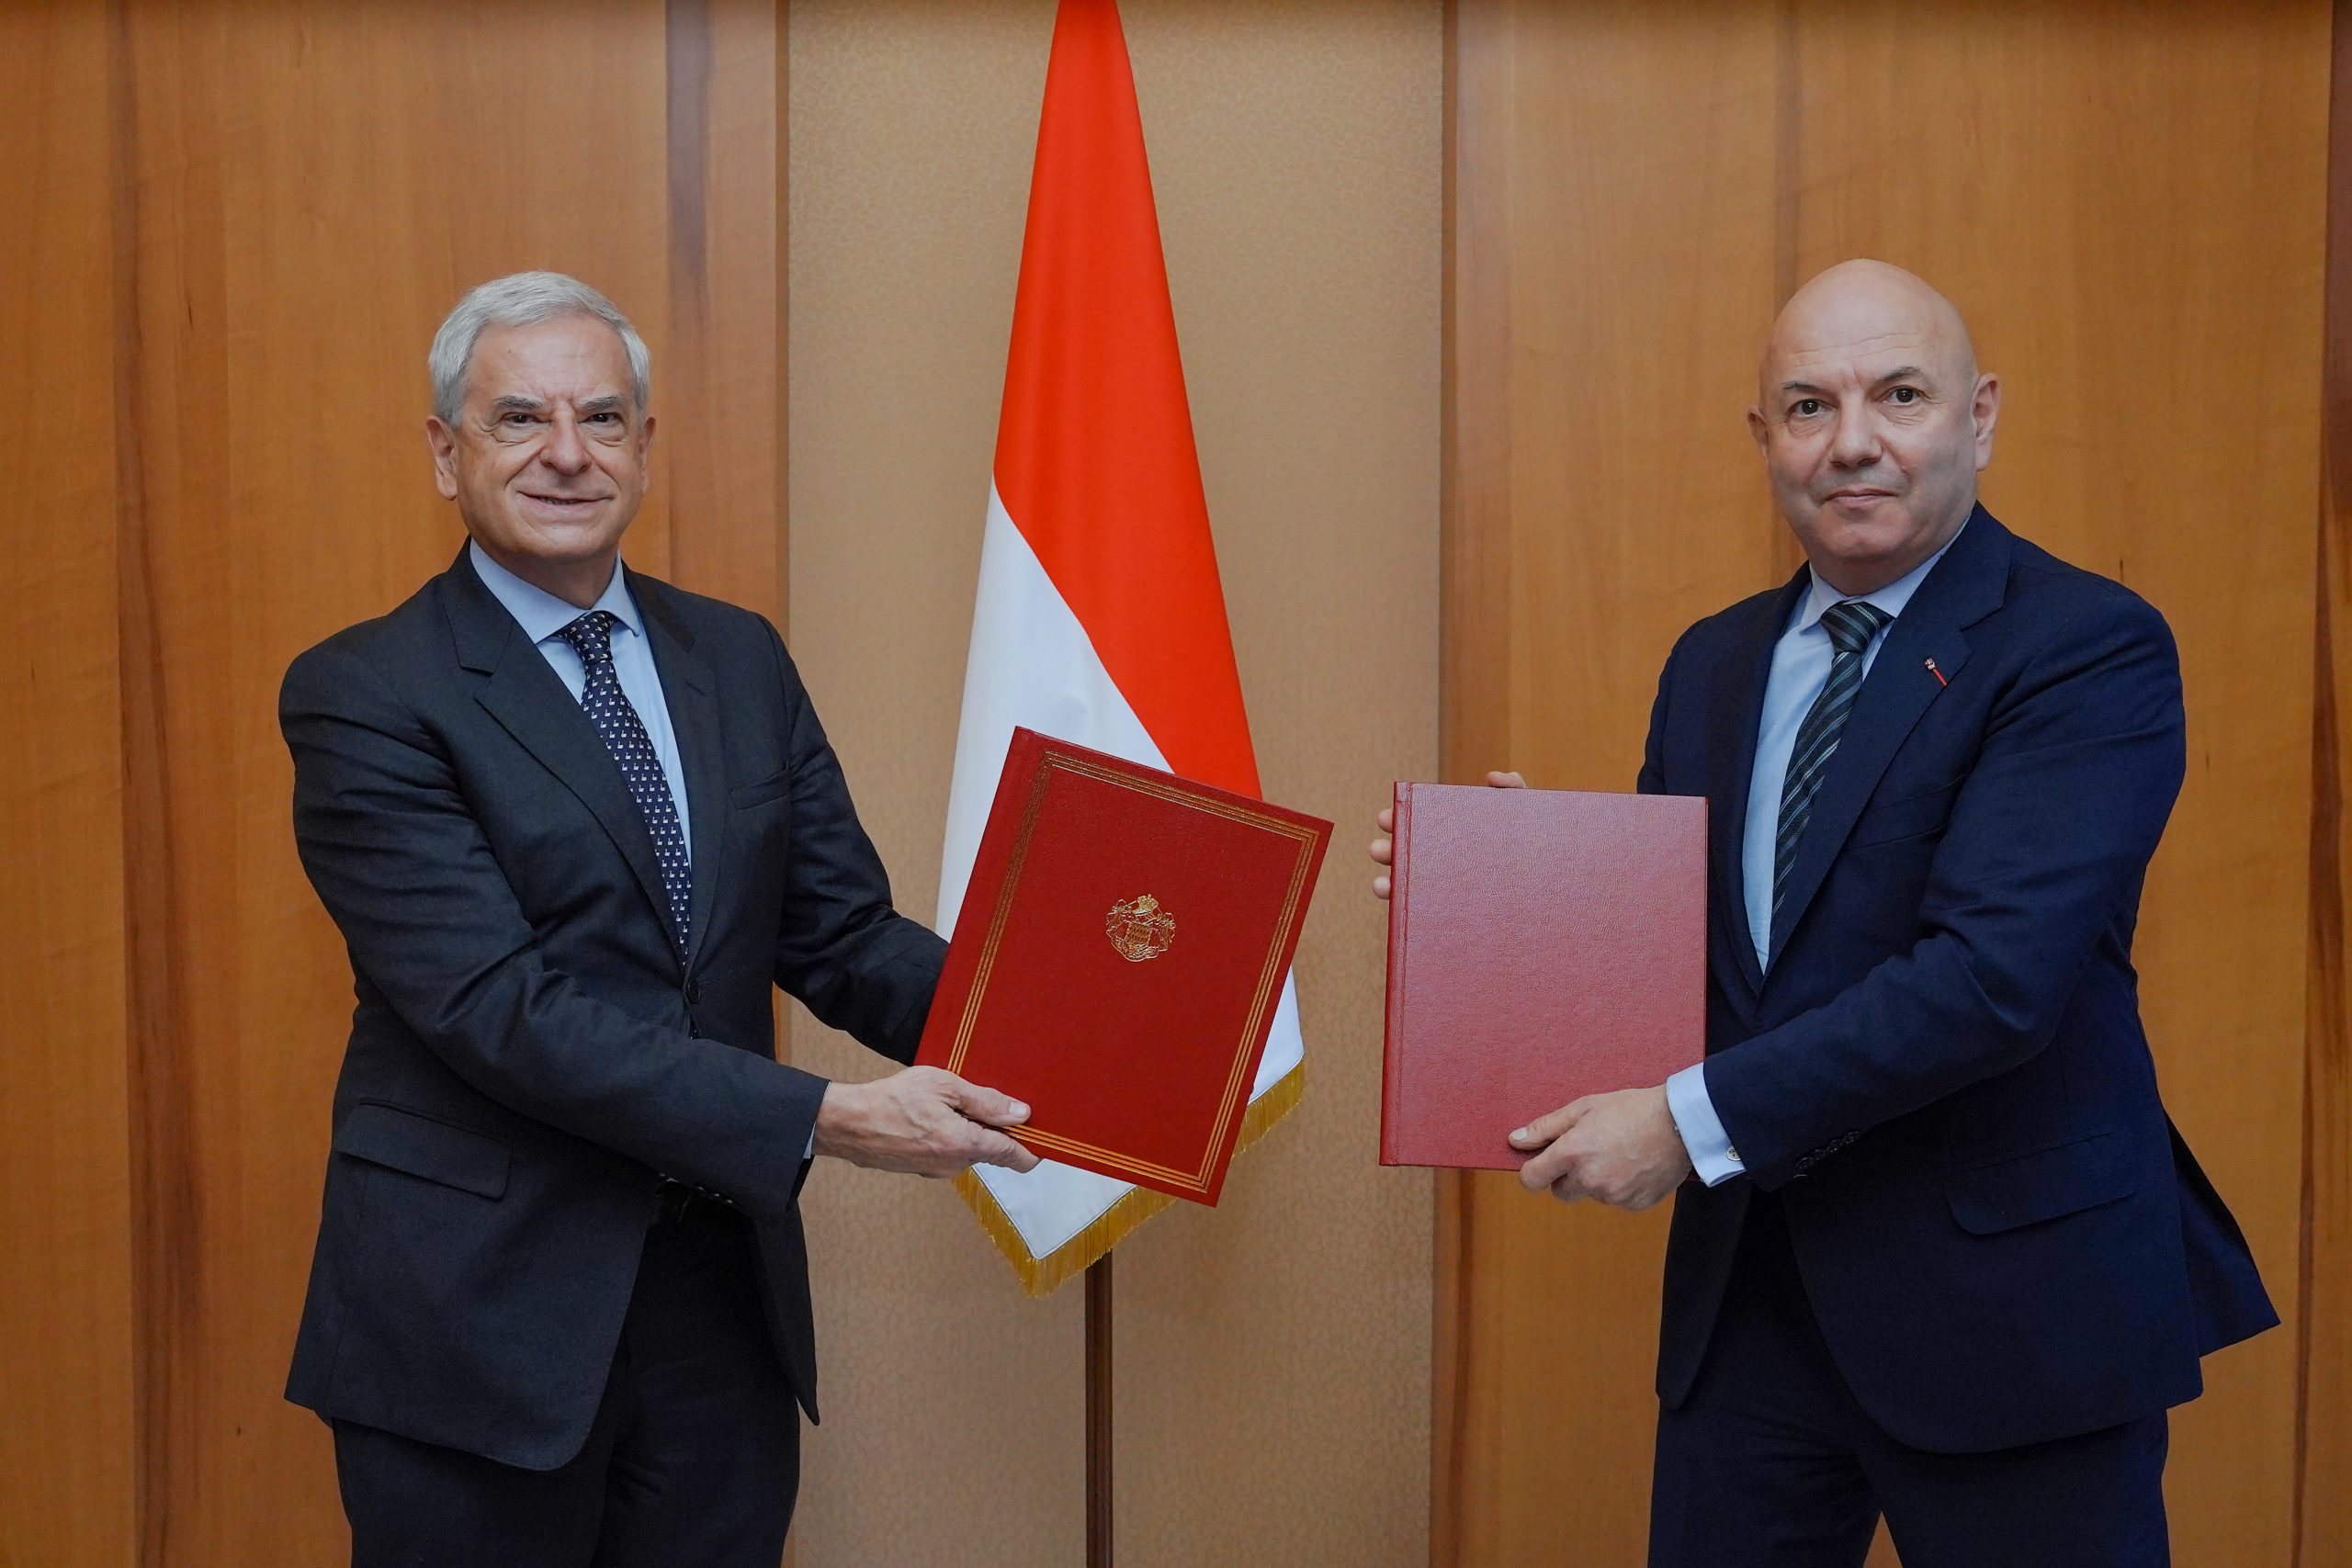 Renewed the cooperation agreement between the Institute and the Principality of Monaco